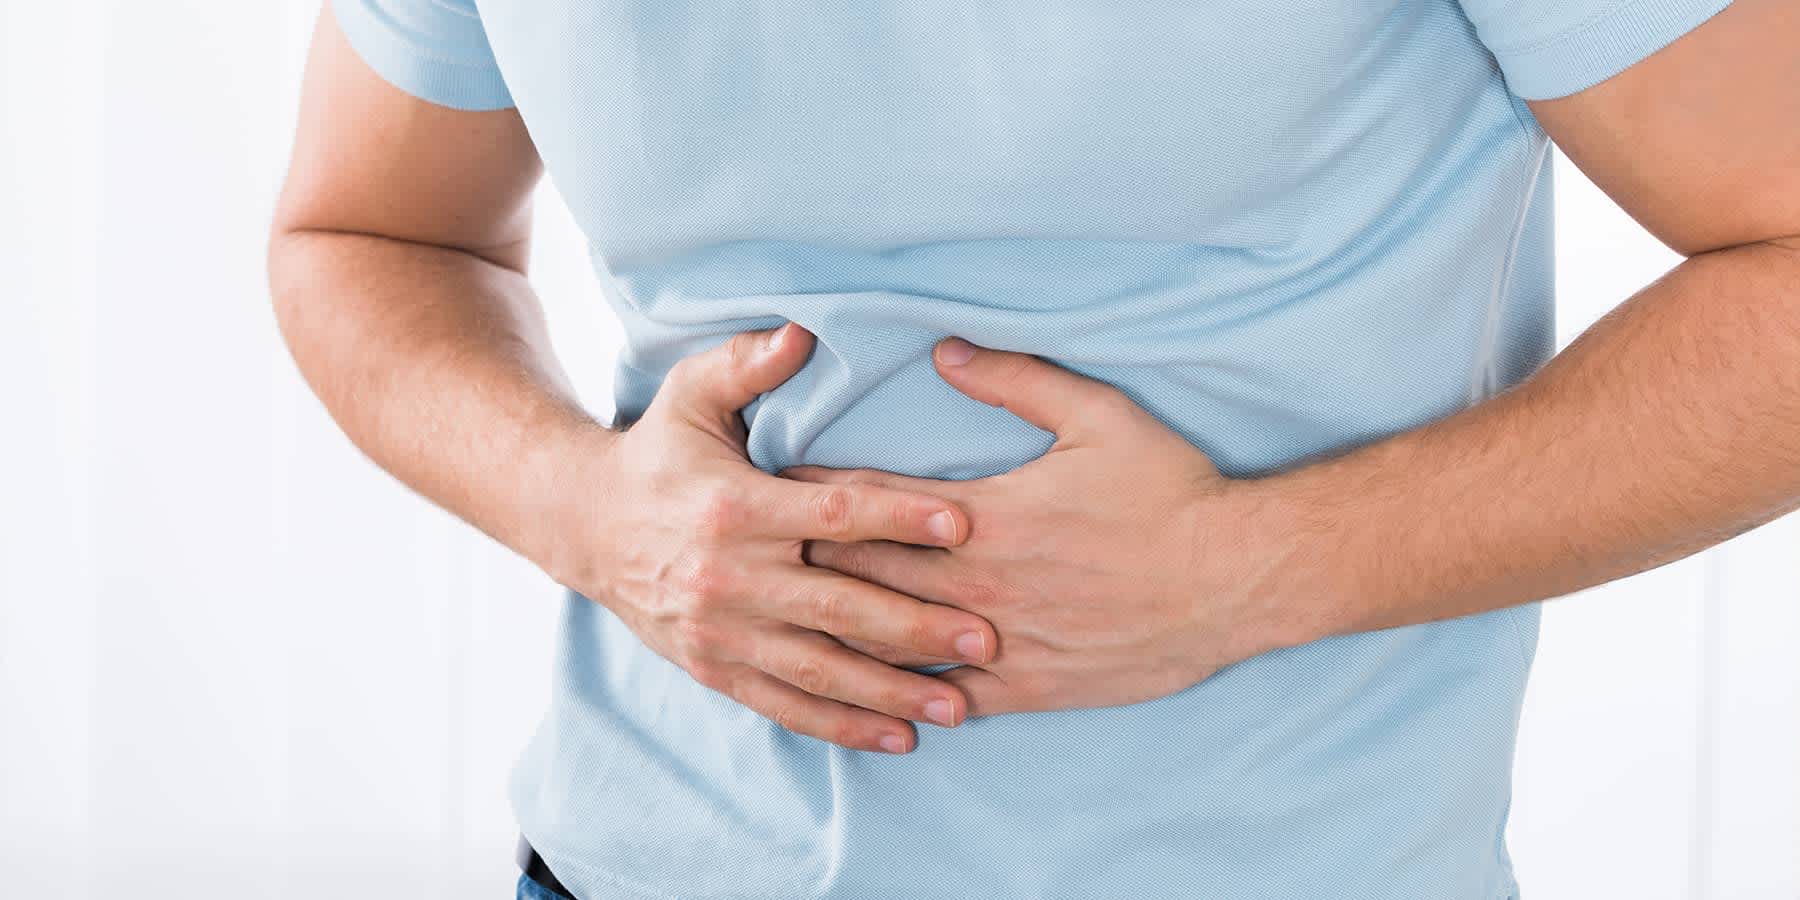 Man experiencing abdominal discomfort as a symptom of colon cancer in men